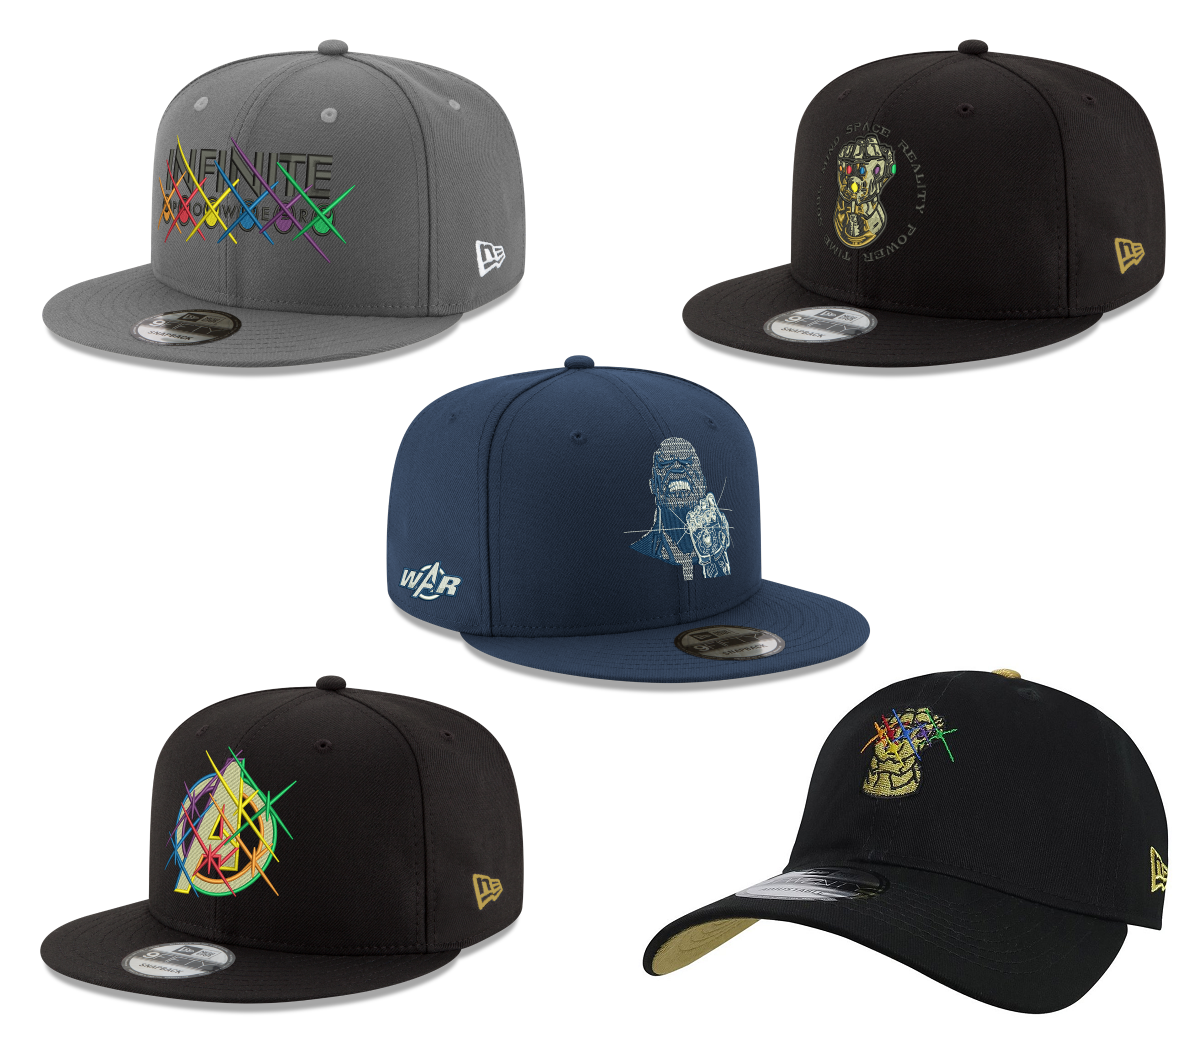 The Blot Says: Avengers: Infinity War Snapback Hat Collection